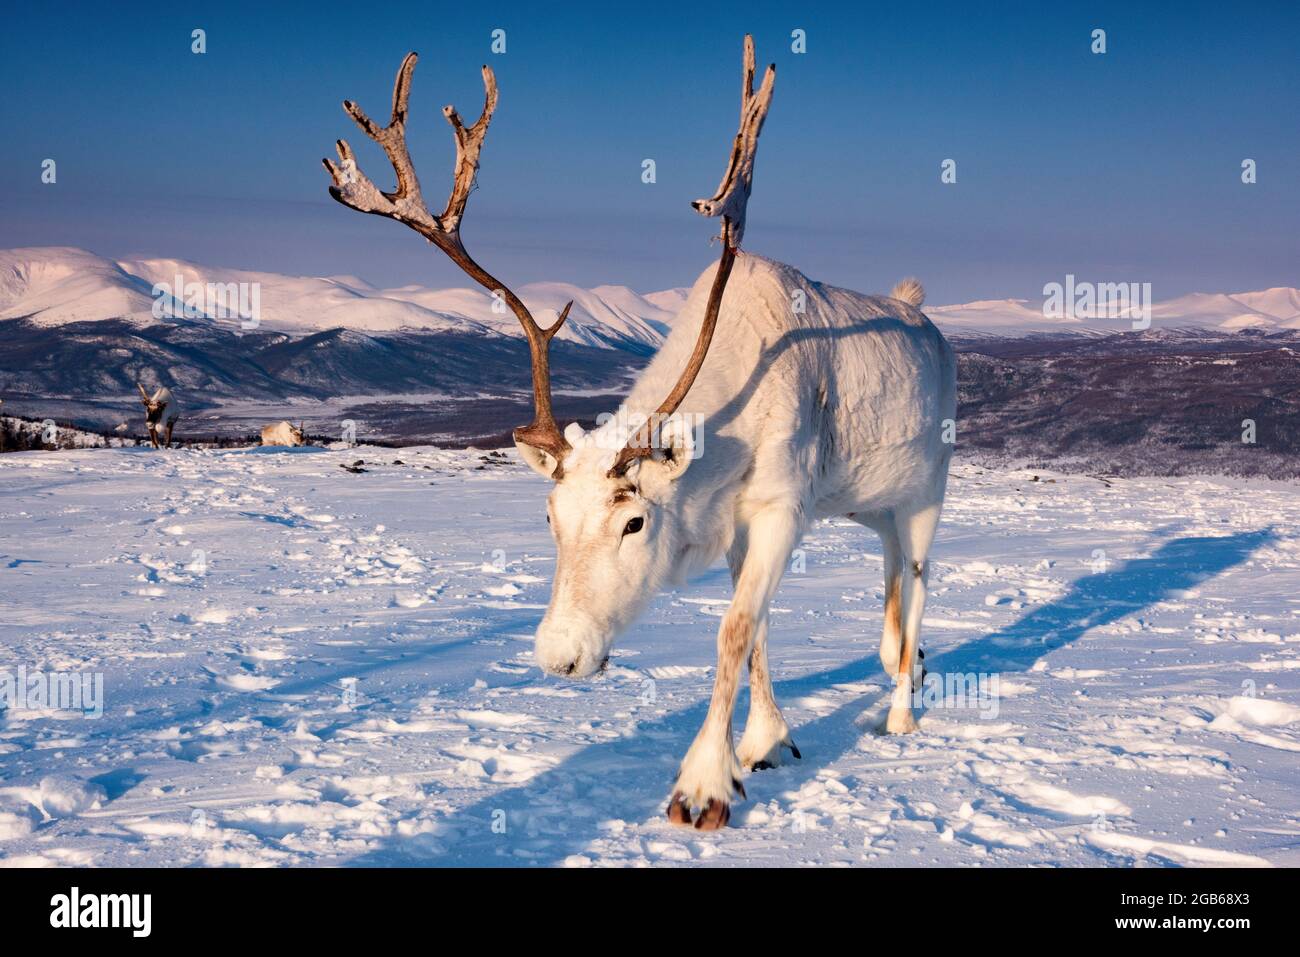 Reindeer in the Mongolian taiga in winter, lit by the warm light of the rising sun., ADDITIONAL-RIGHTS-CLEARANCE-INFO-NOT-AVAILABLE Stock Photo